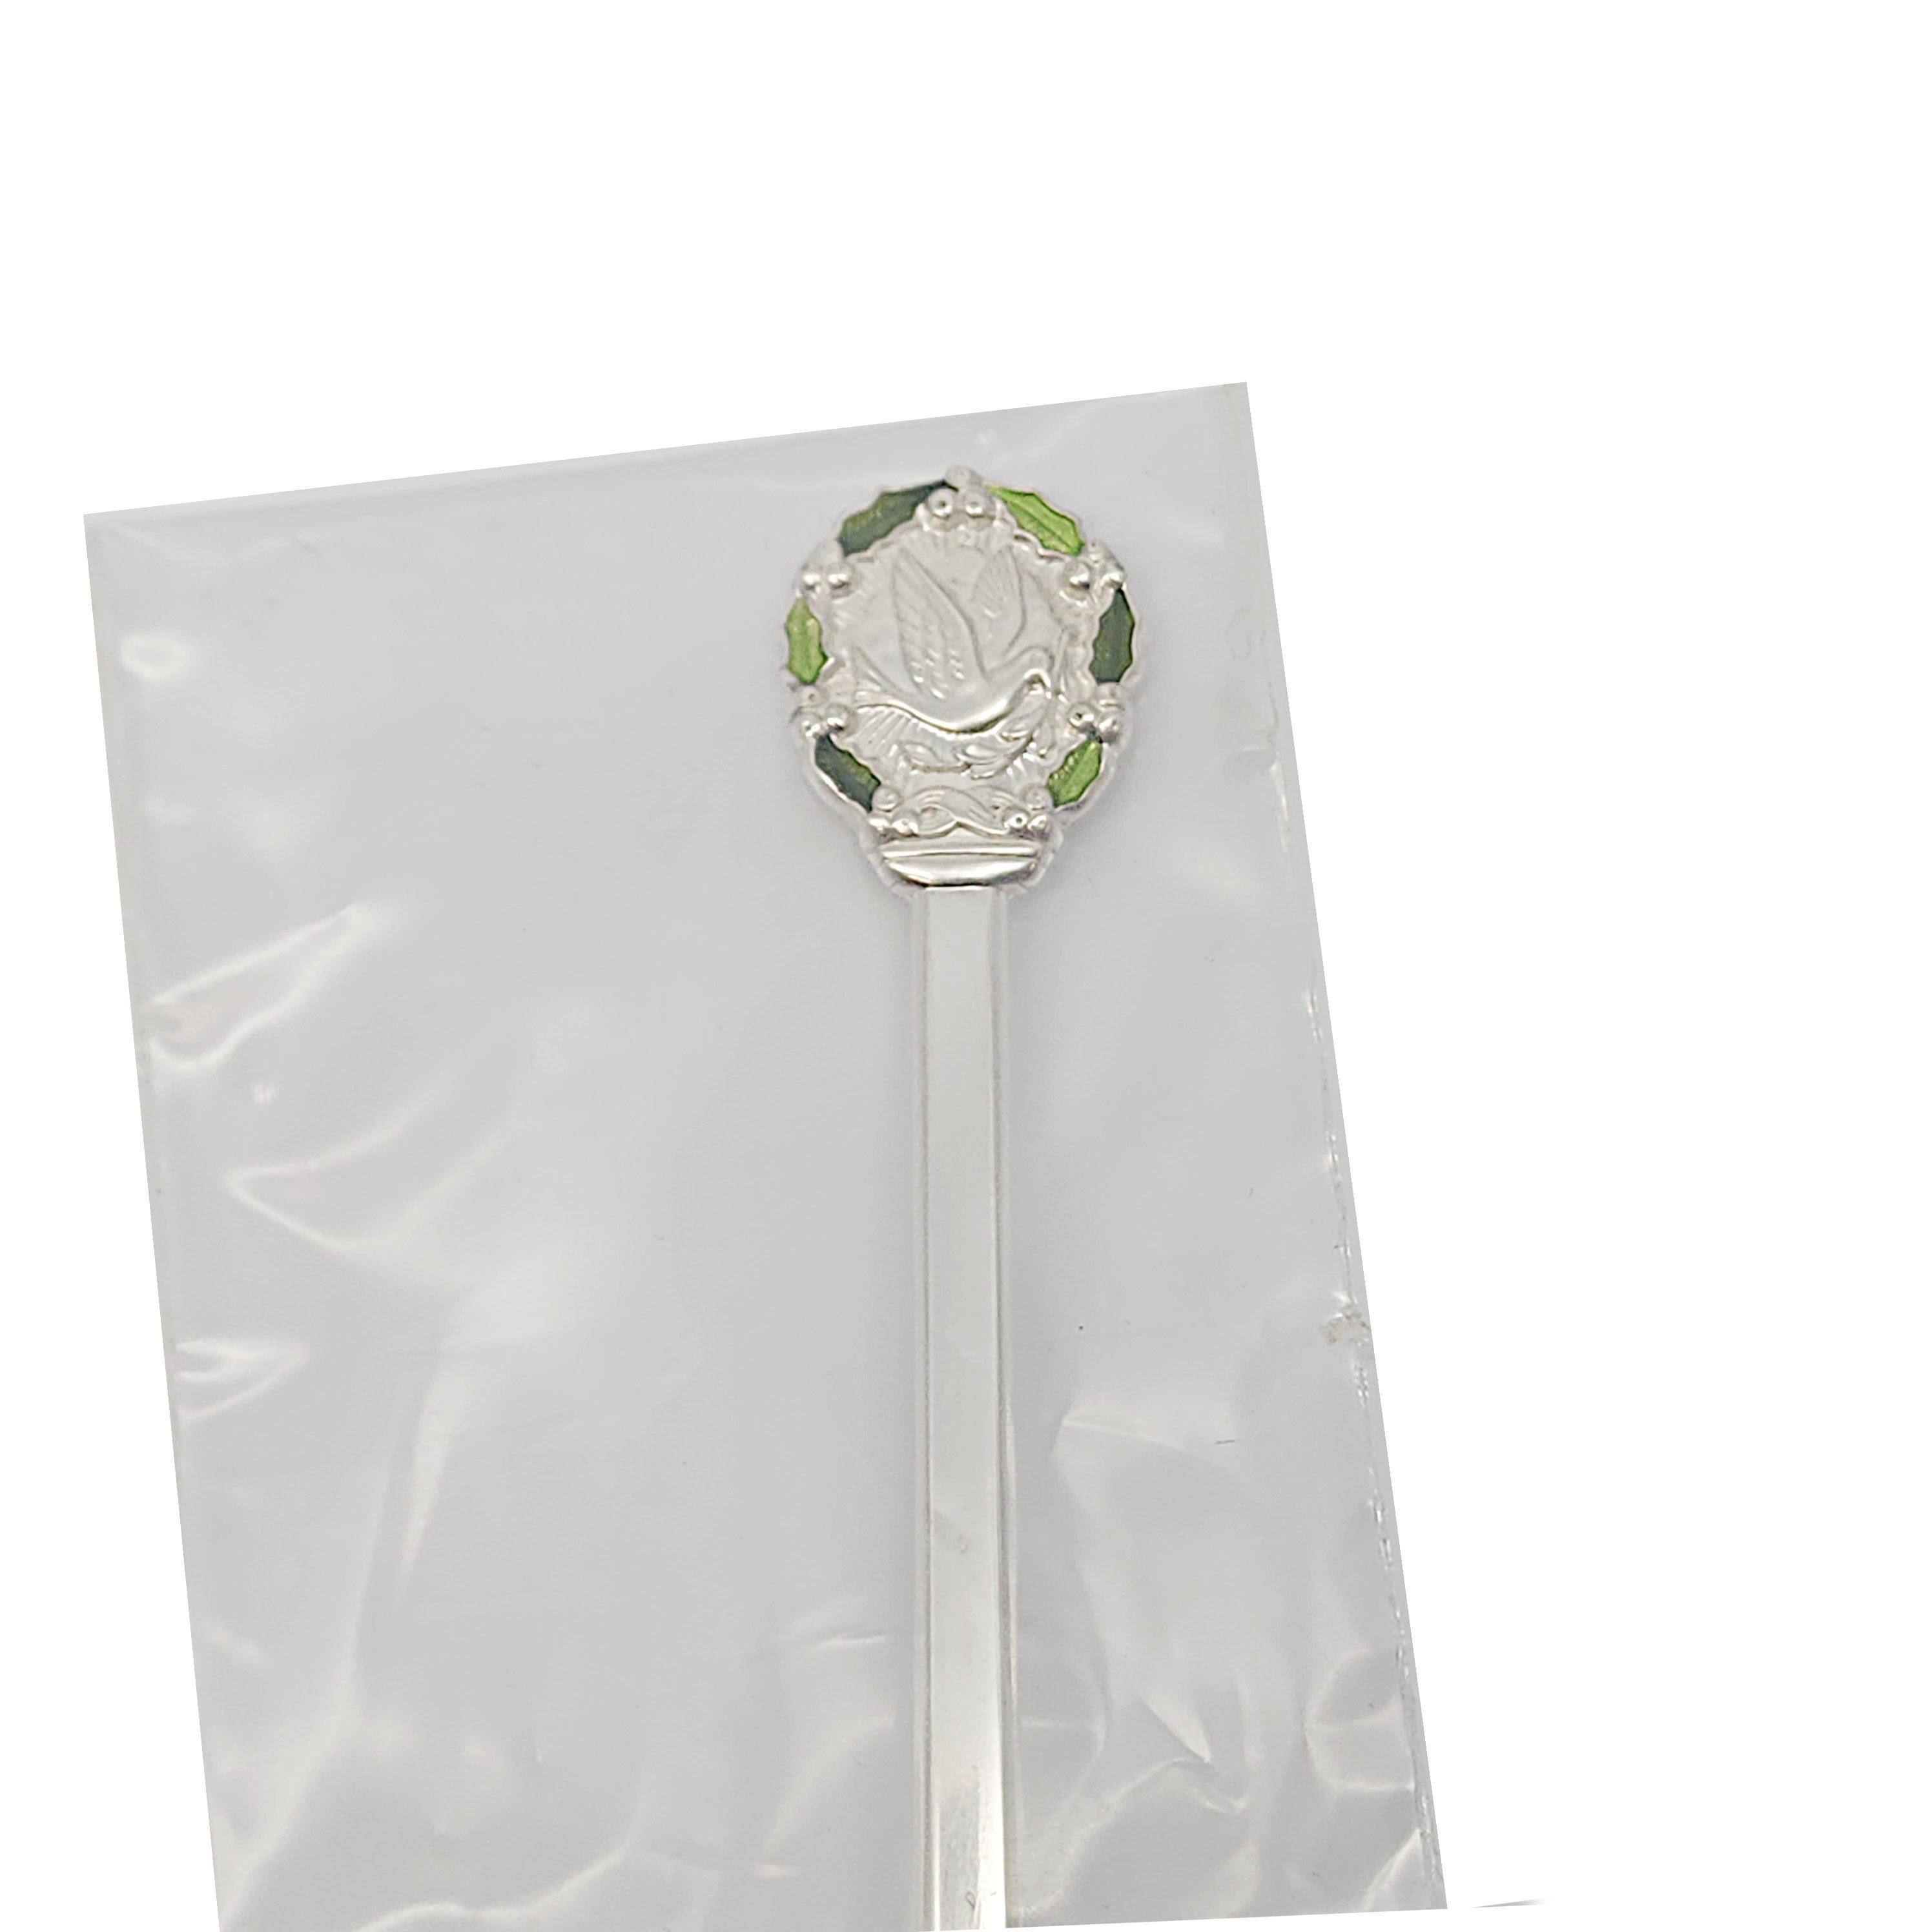 Gorham sterling silver Christmas spoon from 1977, sealed with box.

This Christmas spoon features a dove surrounded by green enamel holly leaves on one side of the handle, 